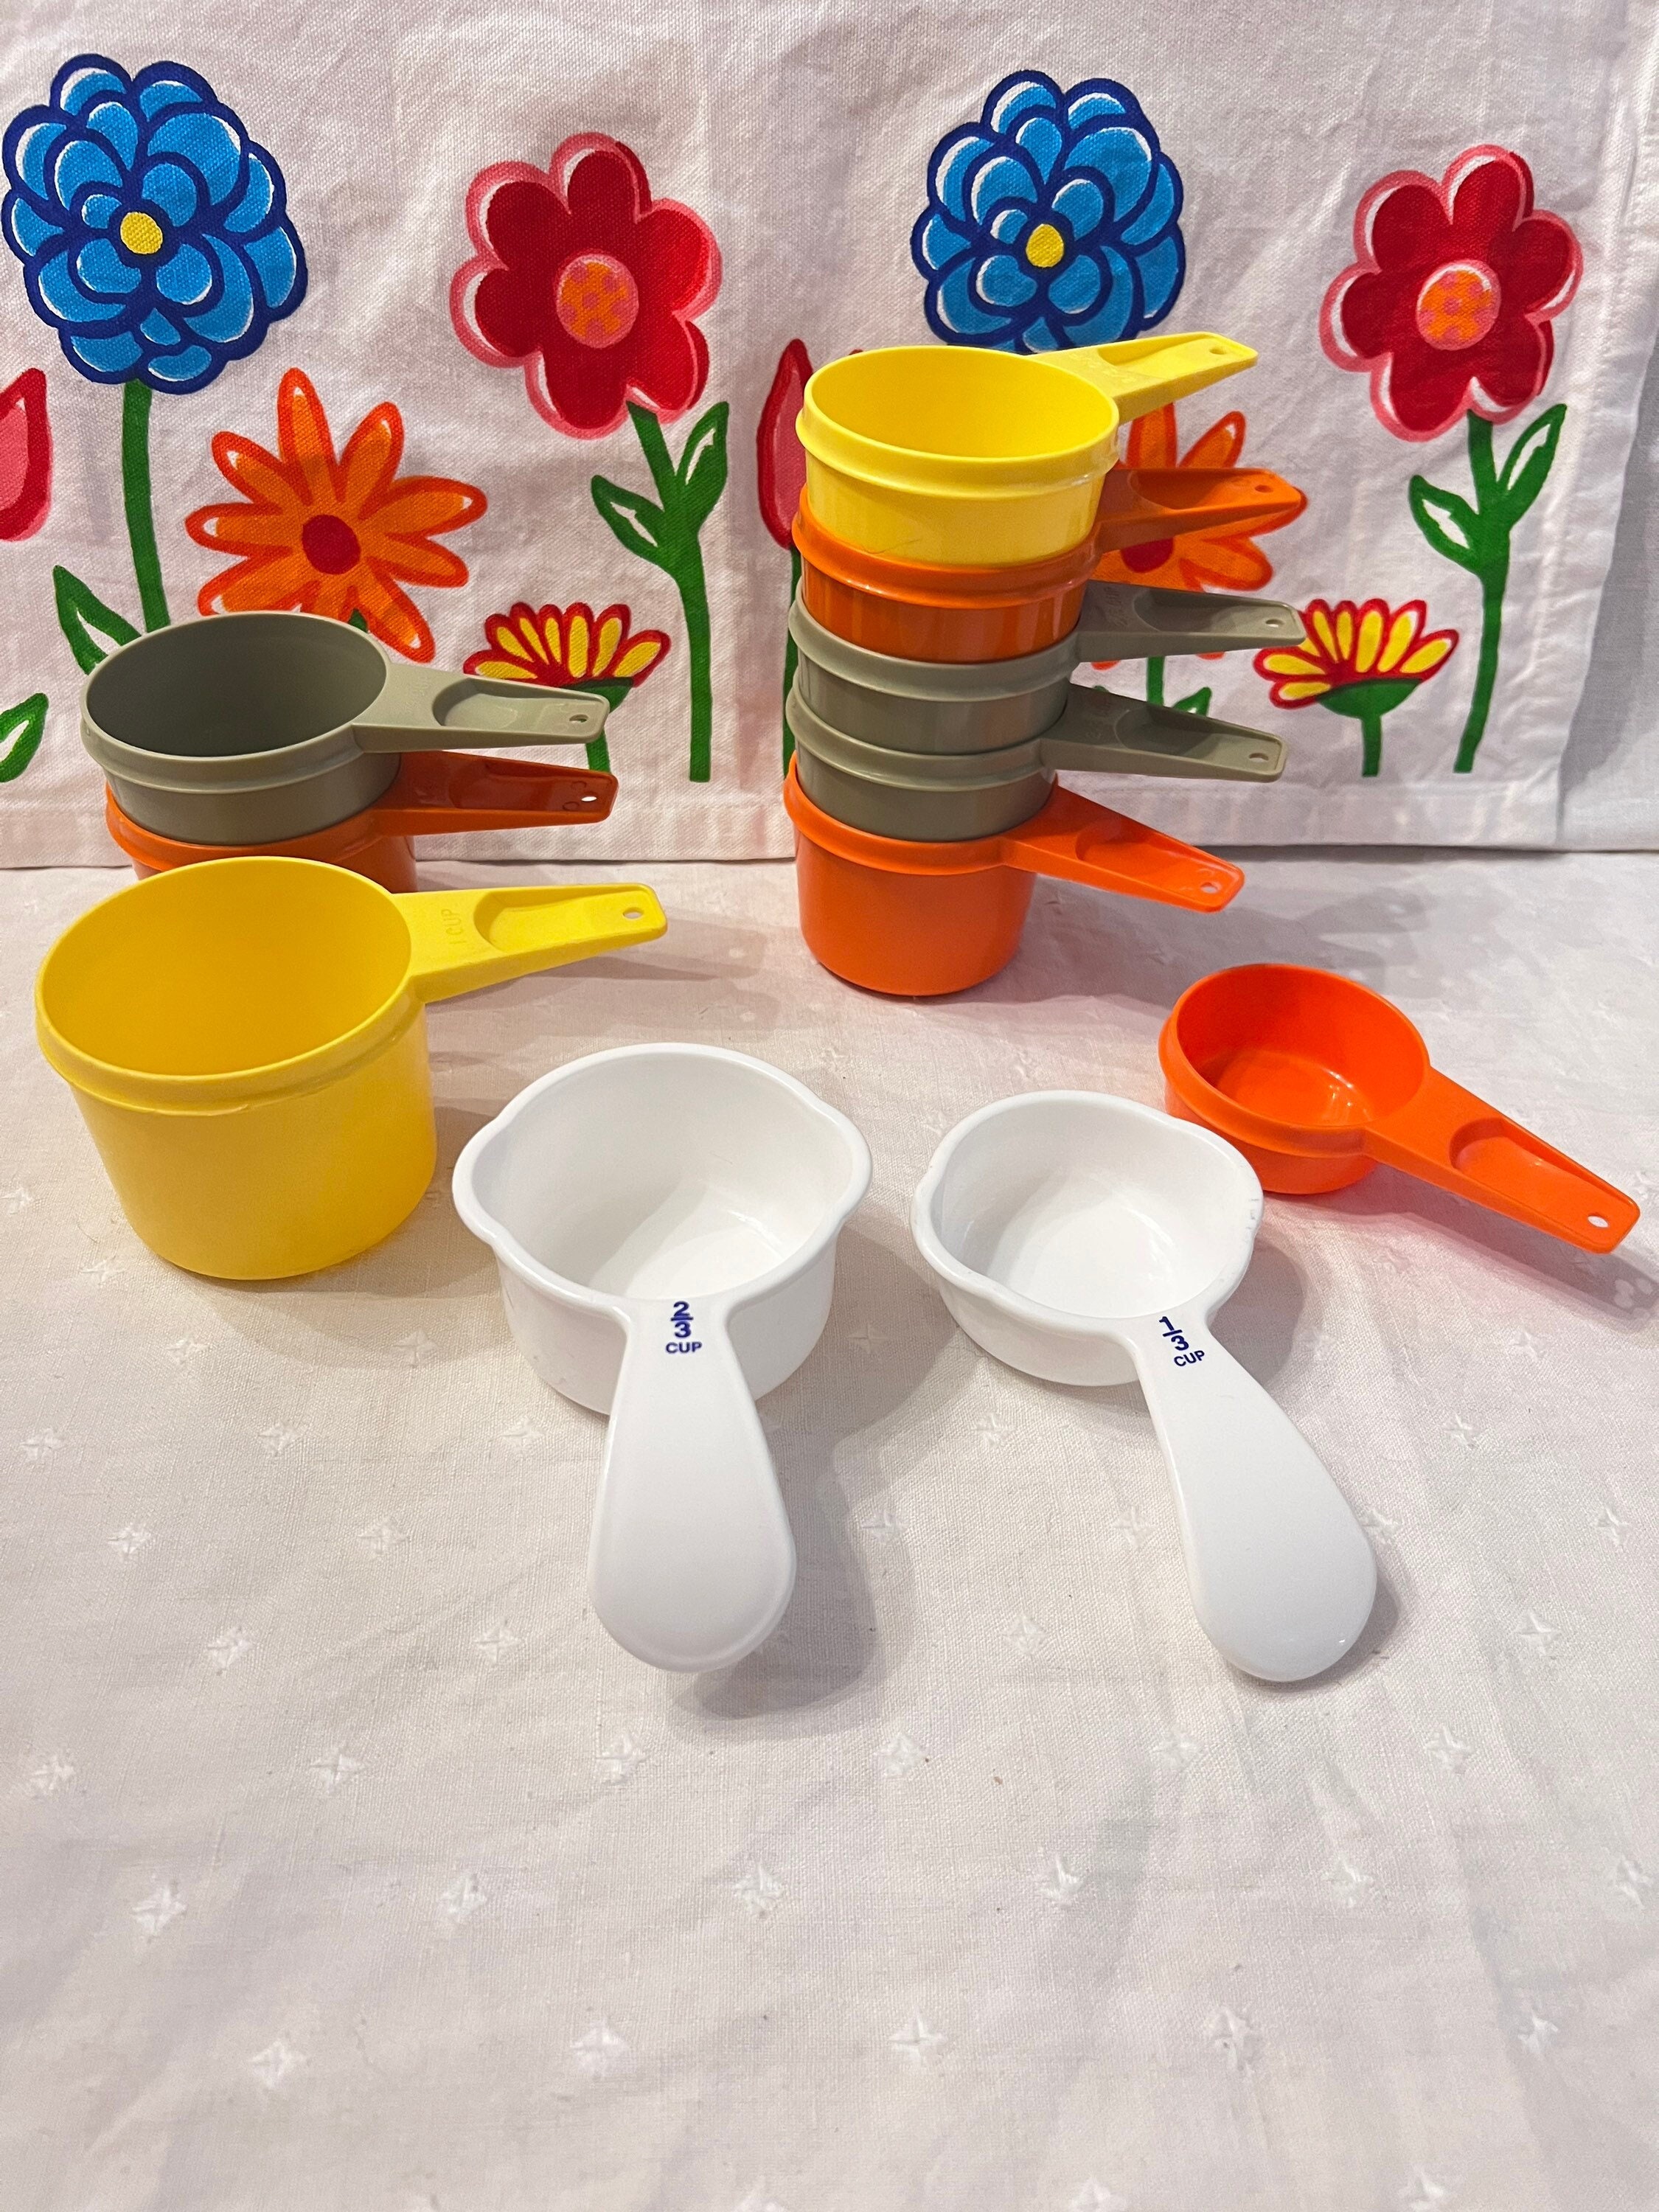 Tupperware Measuring Cups. 4 cup good shape $6. 8 cup with wear